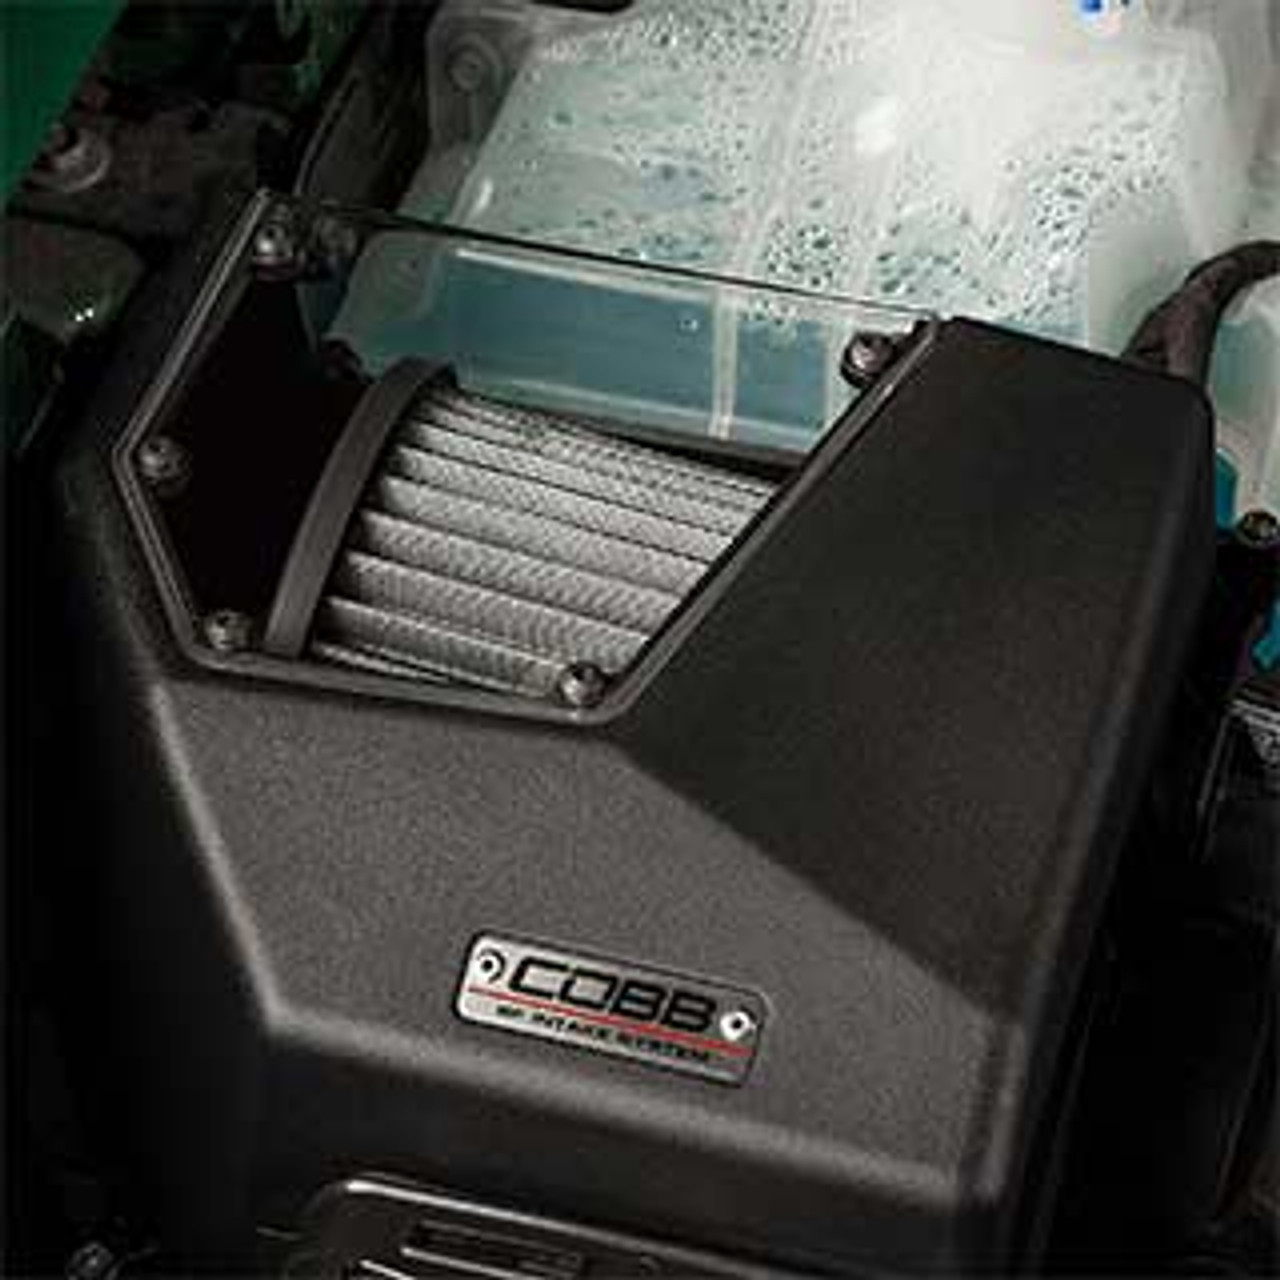 COBB 2021+ Ford Bronco 2.3L/2.7L Intake System - Includes both clear window and open aluminum mesh attachments